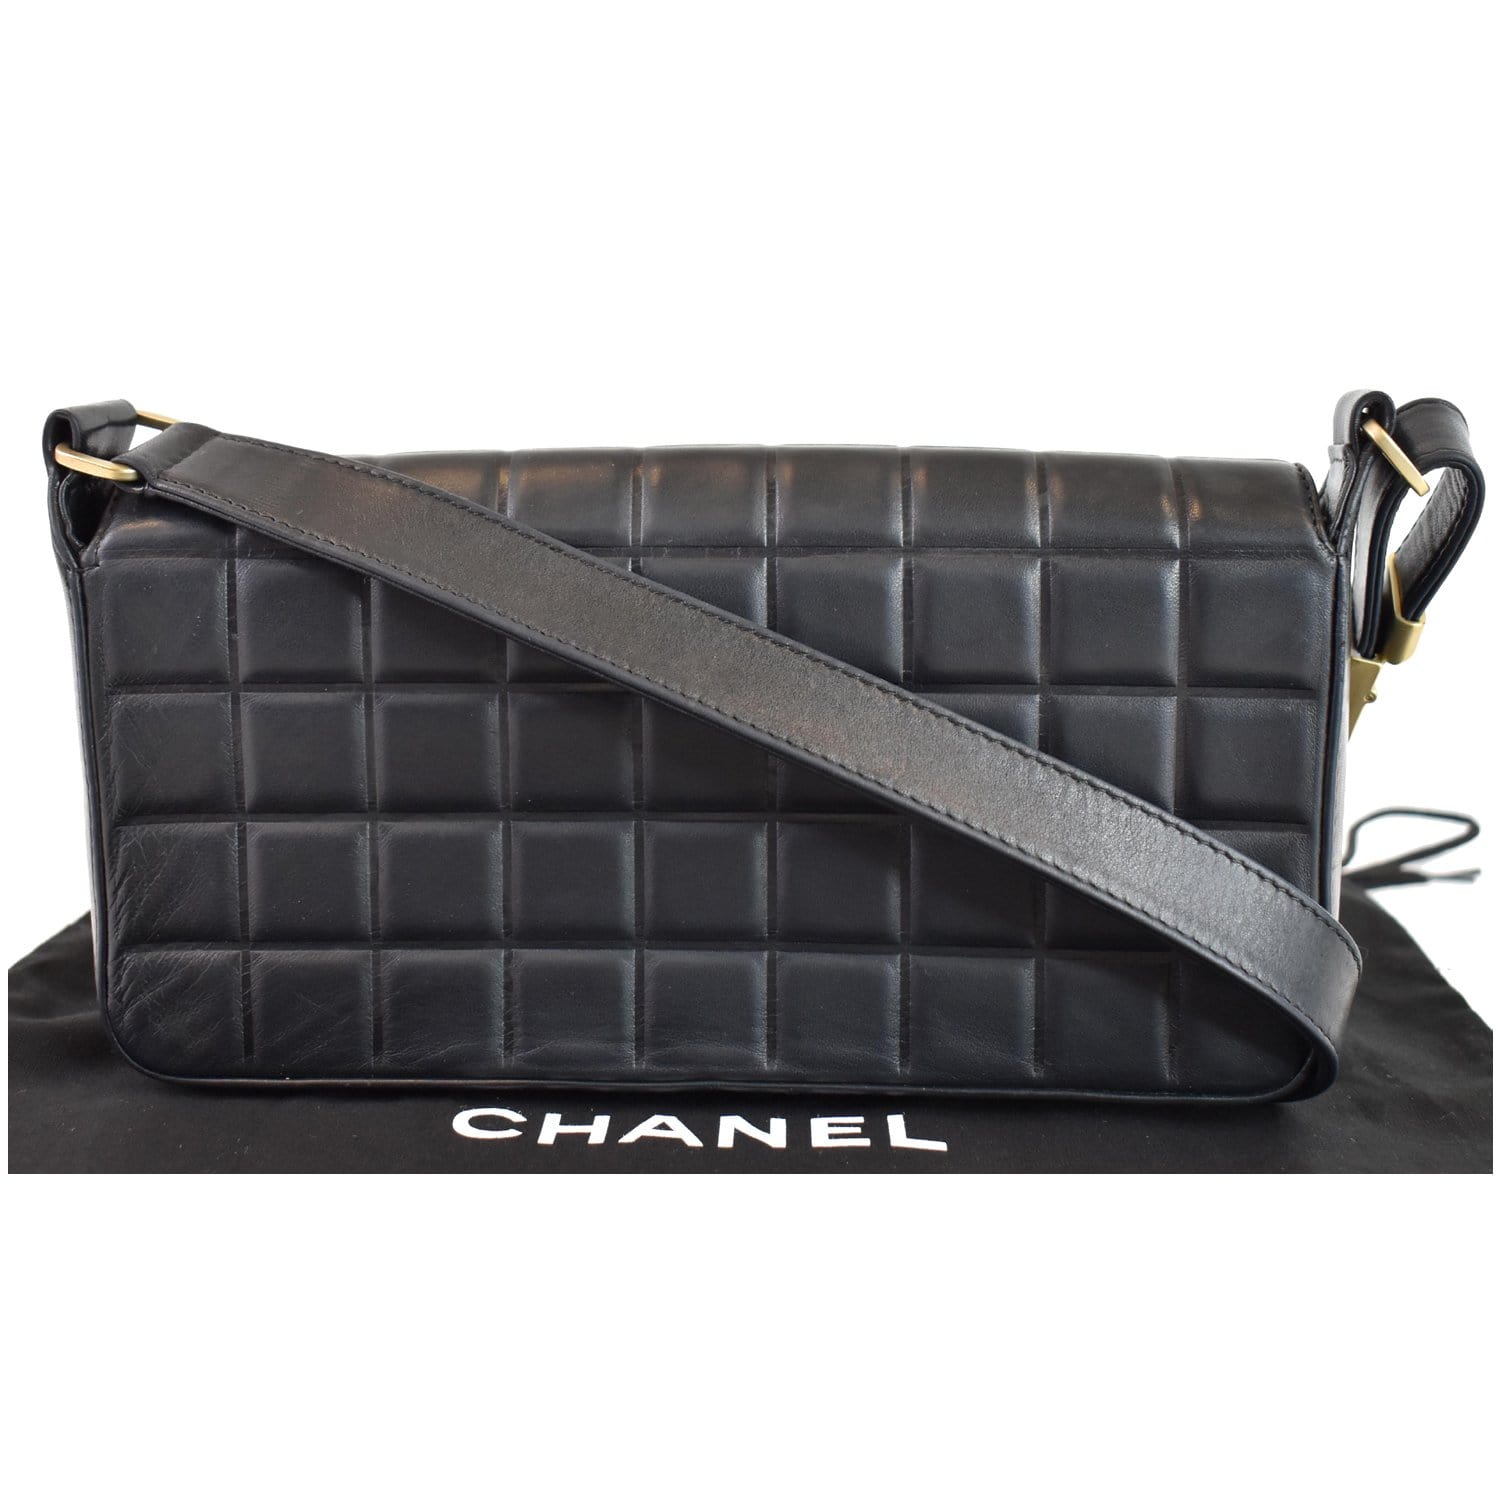 Chanel Quilted Chocolate Bar Shoulder Bag - authenticity Guaranteed